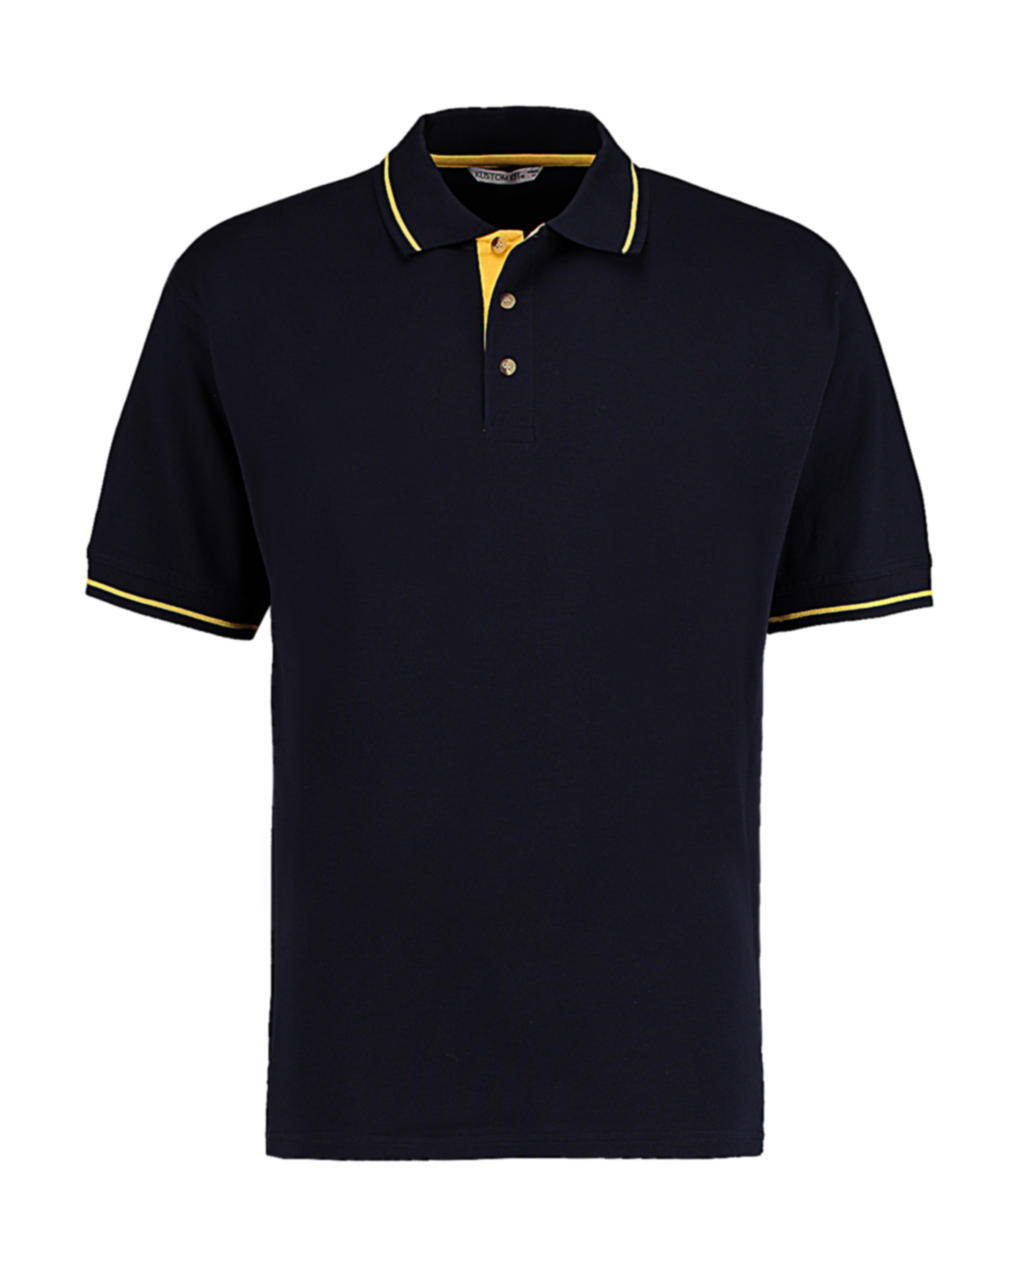  Mens Classic Fit St. Mellion Polo in Farbe Navy/Sun Yellow